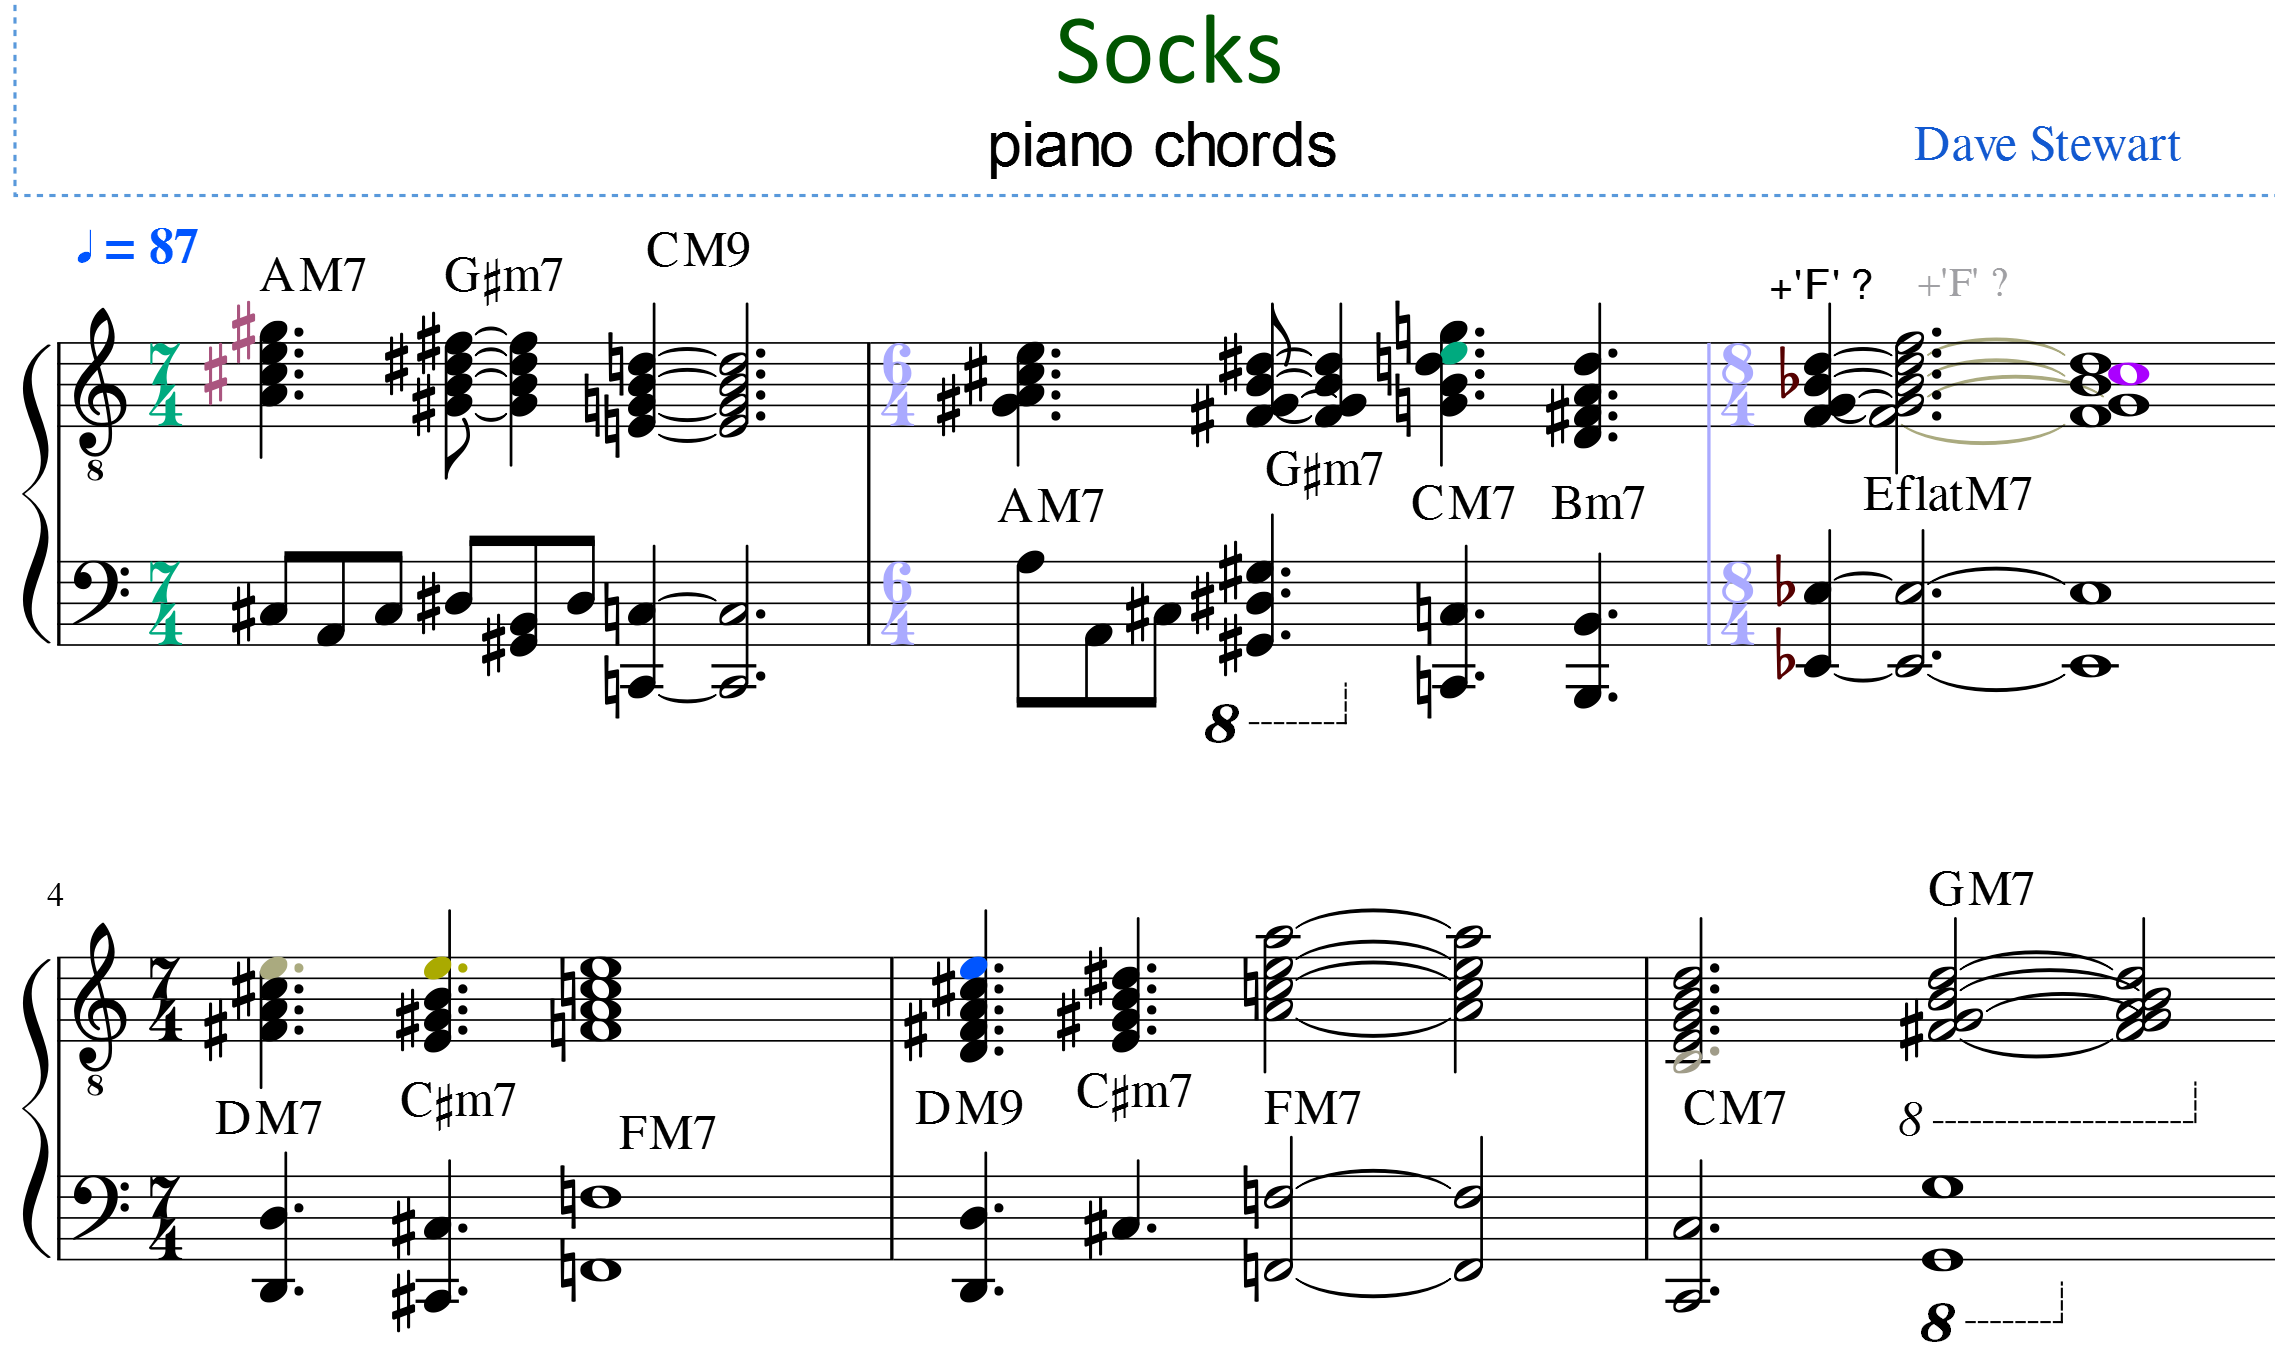 DaveStewart_chord-sequence_Socks1973_6measures_no-key-signature.png